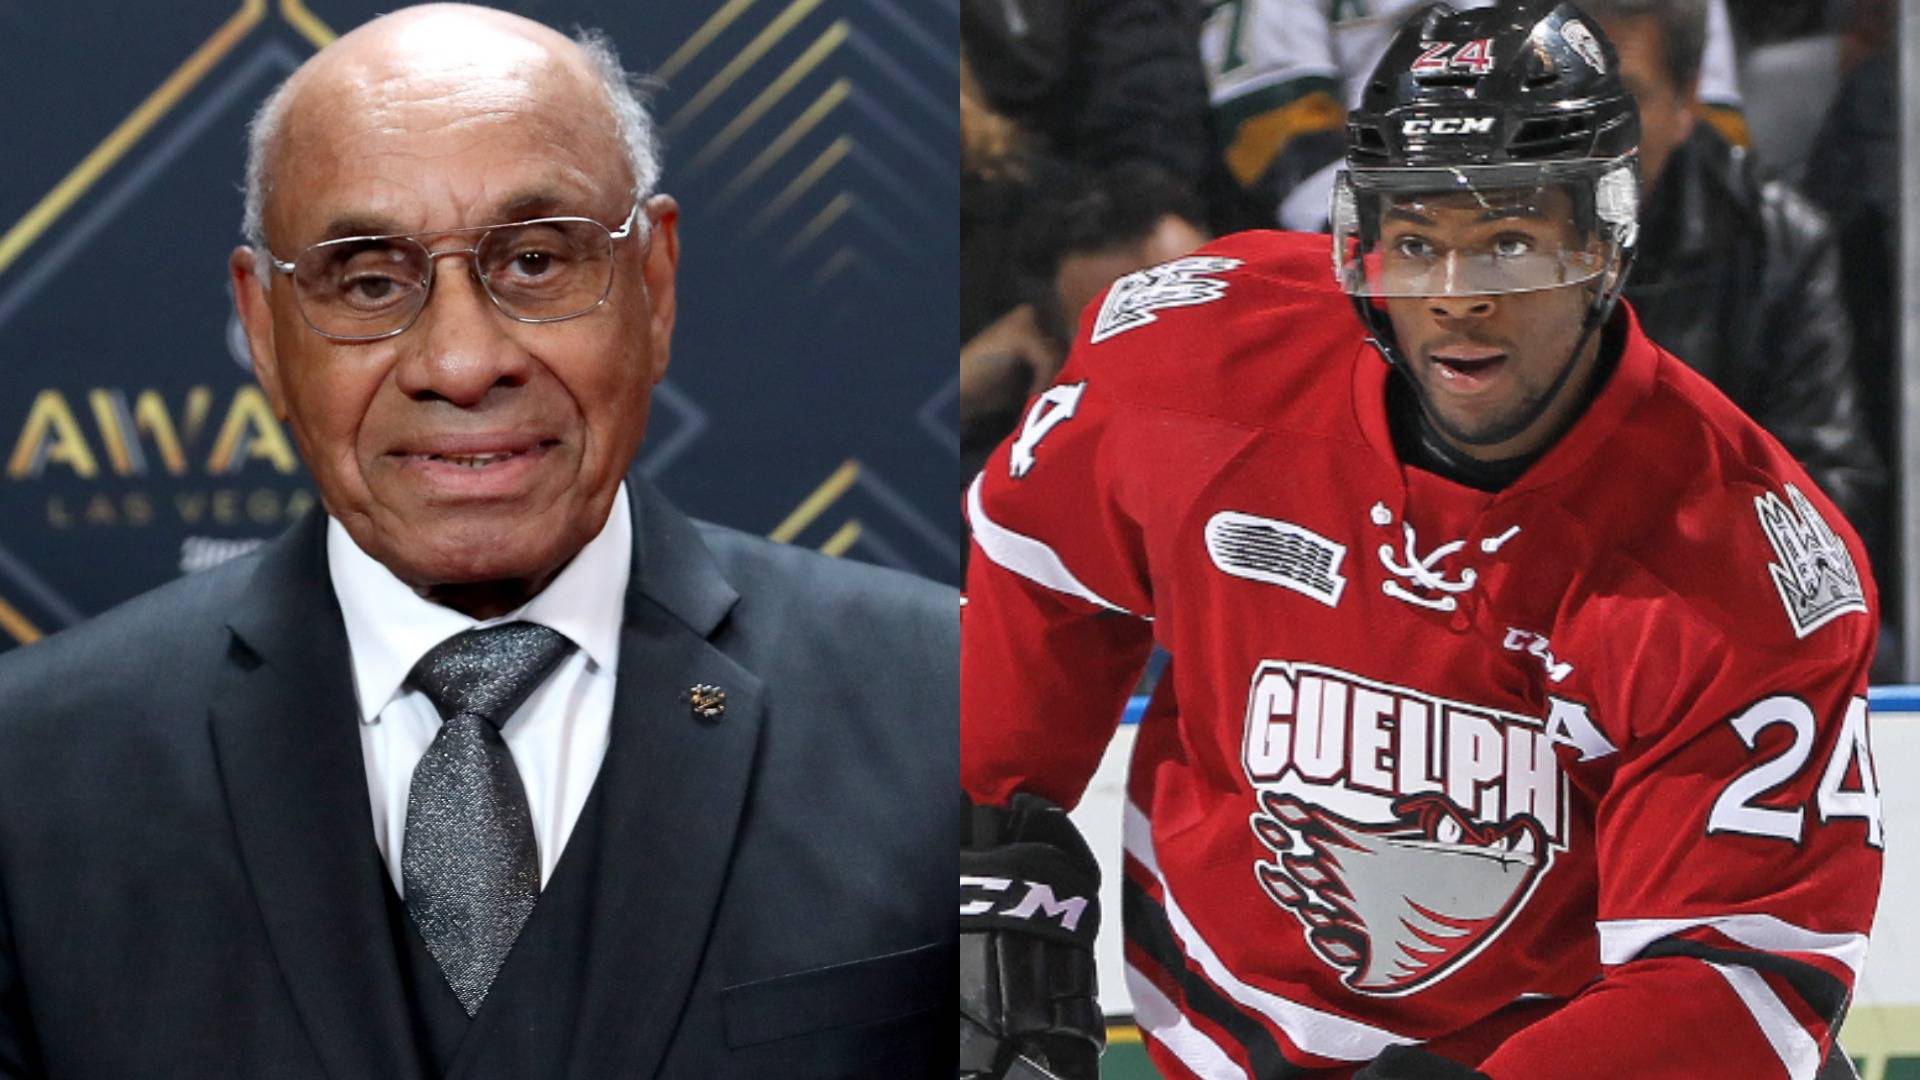 10 Things You May Not Know About Willie O'Ree